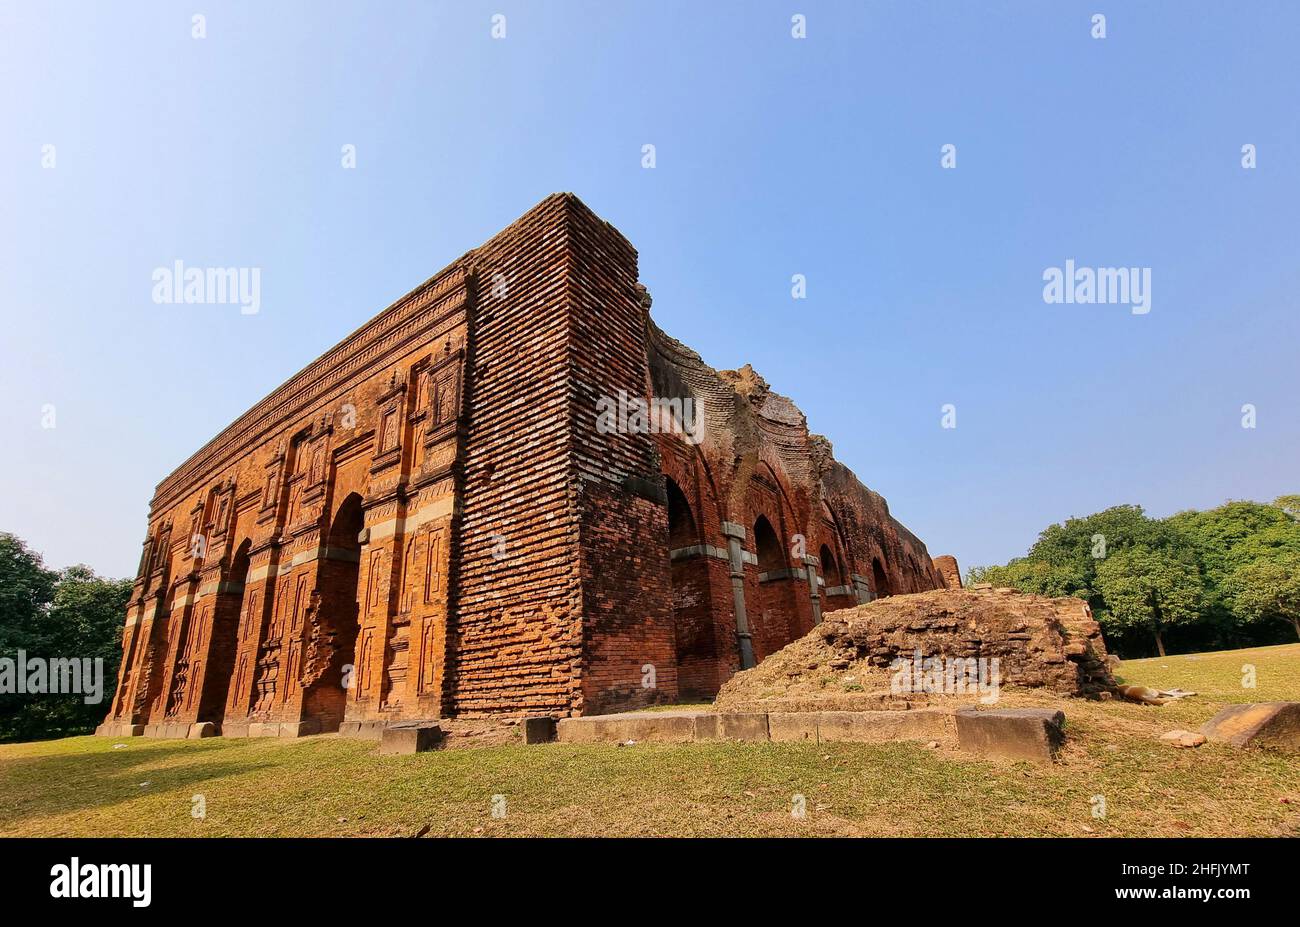 Remnants of different terracotta and brick mosques, built during the 12th to 16th century can be found in Naogaon and Chapai Nawabganj, both districts in Rajshahi Division. Modern Rajshahi lies in the ancient region of Pundravardhana. The foundation of the city dates to 1634, according to epigraphic records at the mausoleum of Sufi saint Shah Makdum. The area hosted a Dutch settlement in the 18th century. The Rajshahi municipality was constituted during the British Raj in 1876. Numerous mosques were built during the five and a half centuries of Muslim rule before the British colonial period, b Stock Photo